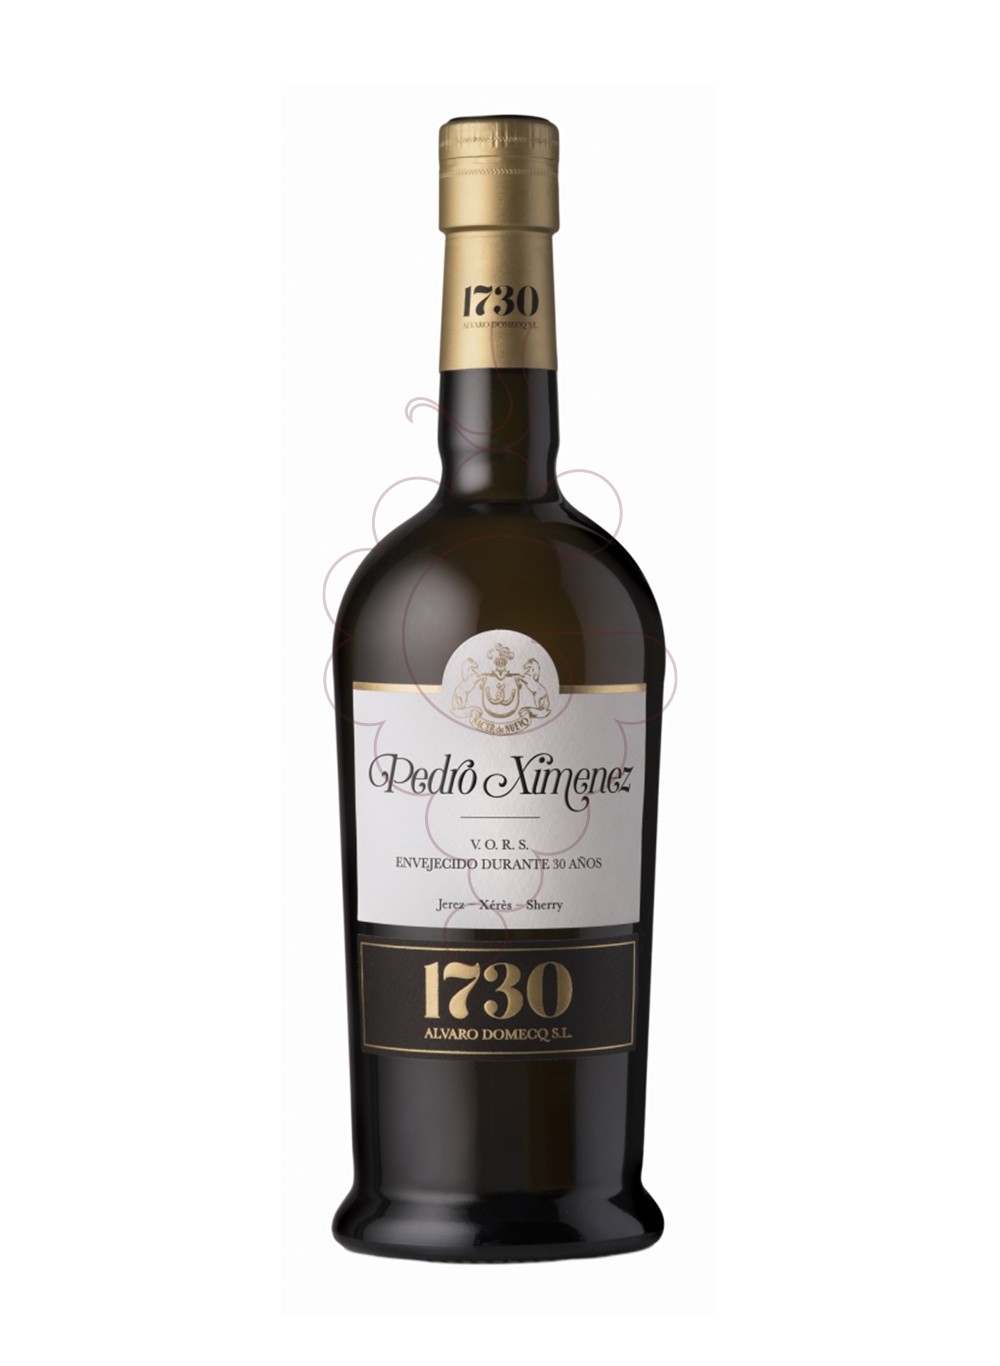 Photo P.ximenez 1730 30 anys 75 cl fortified wine